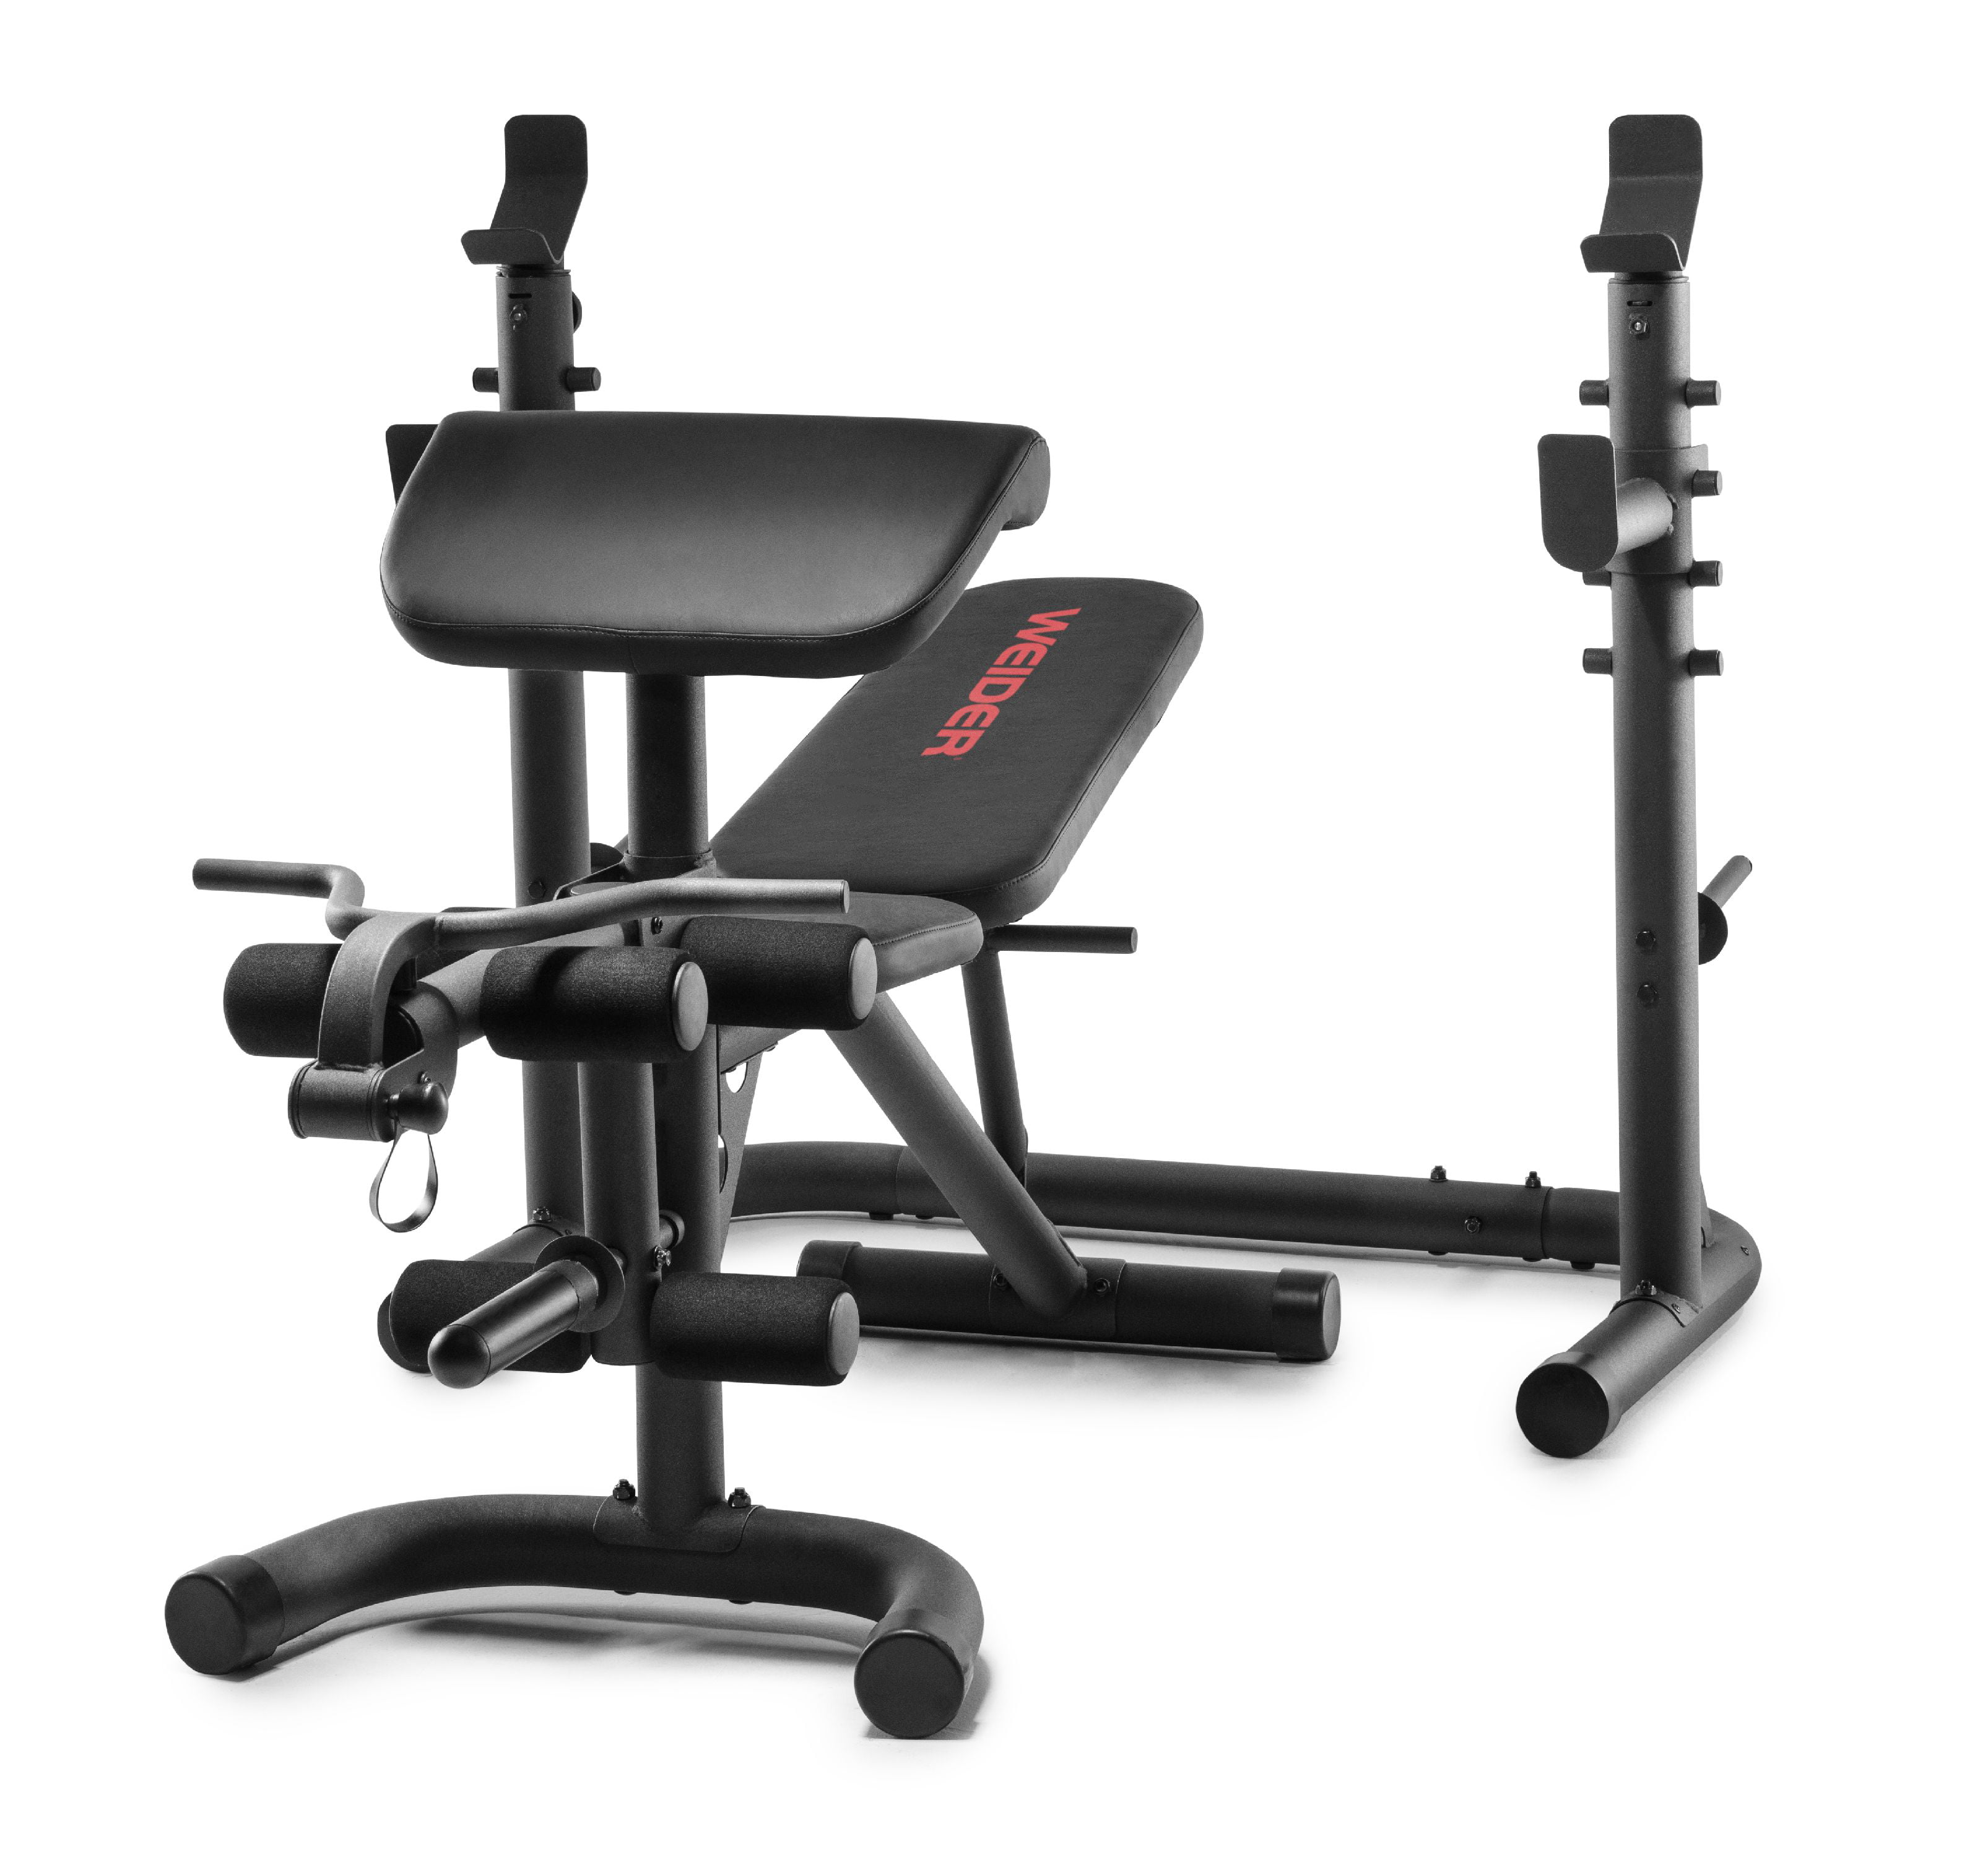  Workout Bench Walmart.ca for Burn Fat fast